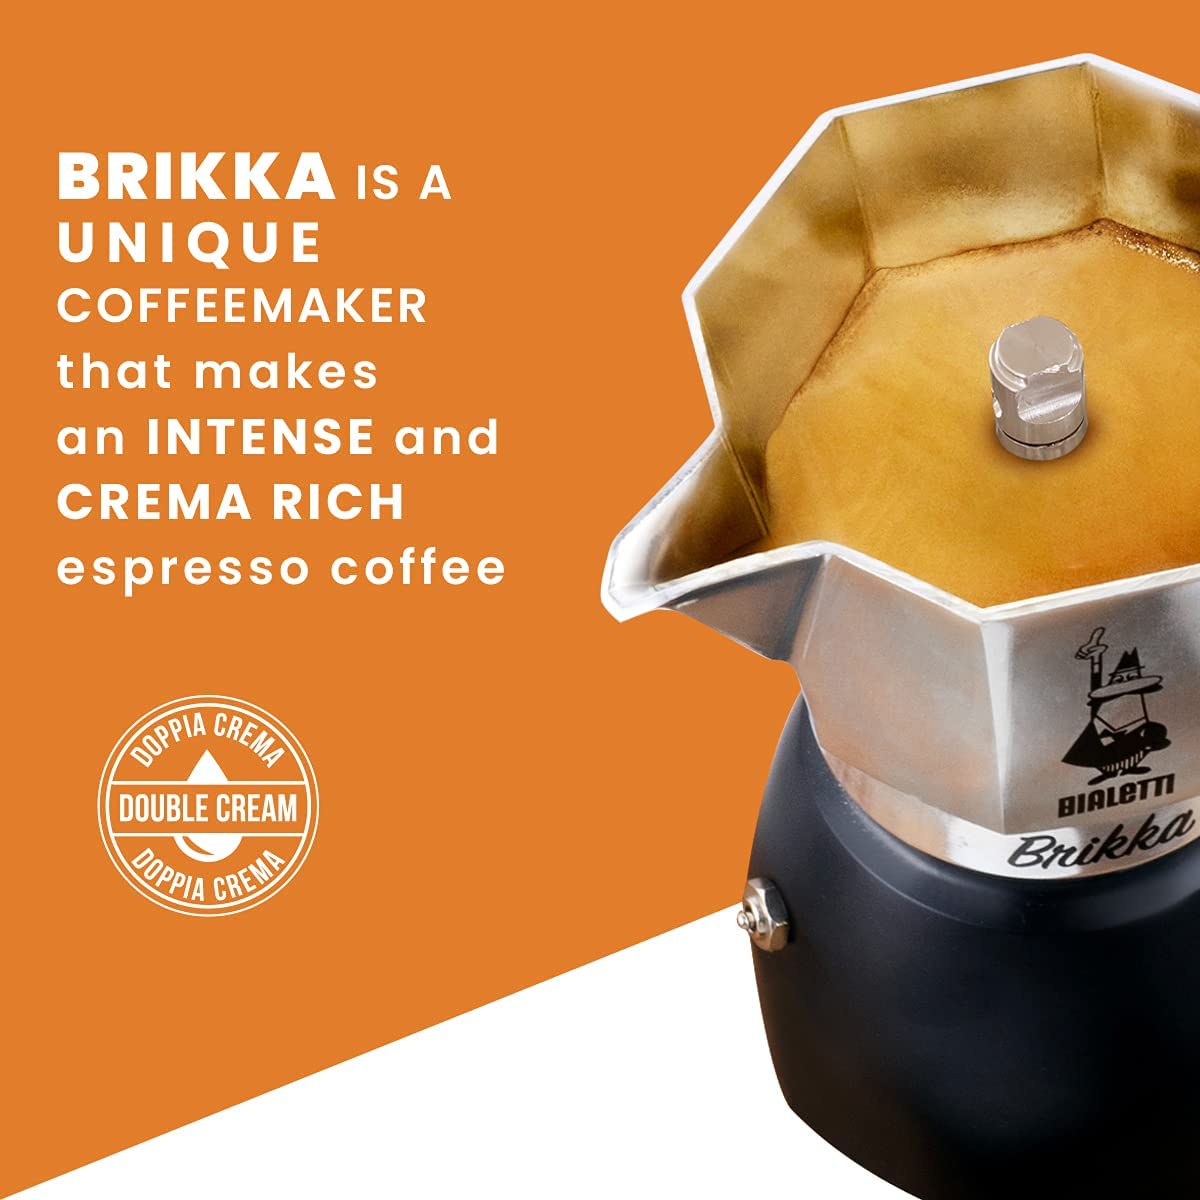 Bialetti Brikka made just in Romania or other countries? : r/mokapot